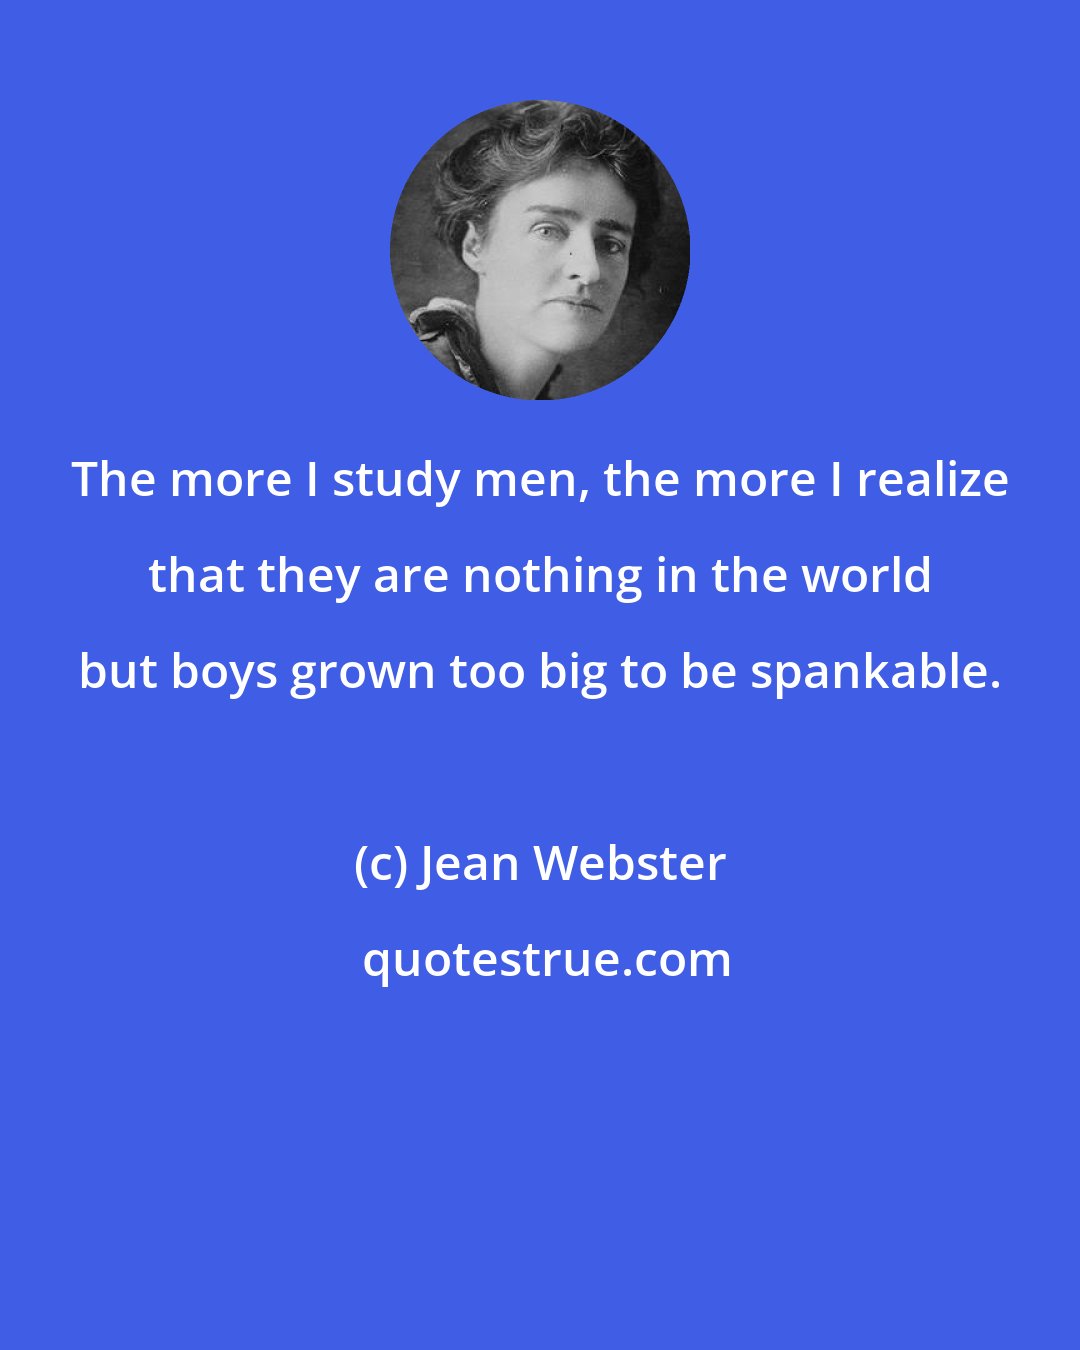 Jean Webster: The more I study men, the more I realize that they are nothing in the world but boys grown too big to be spankable.